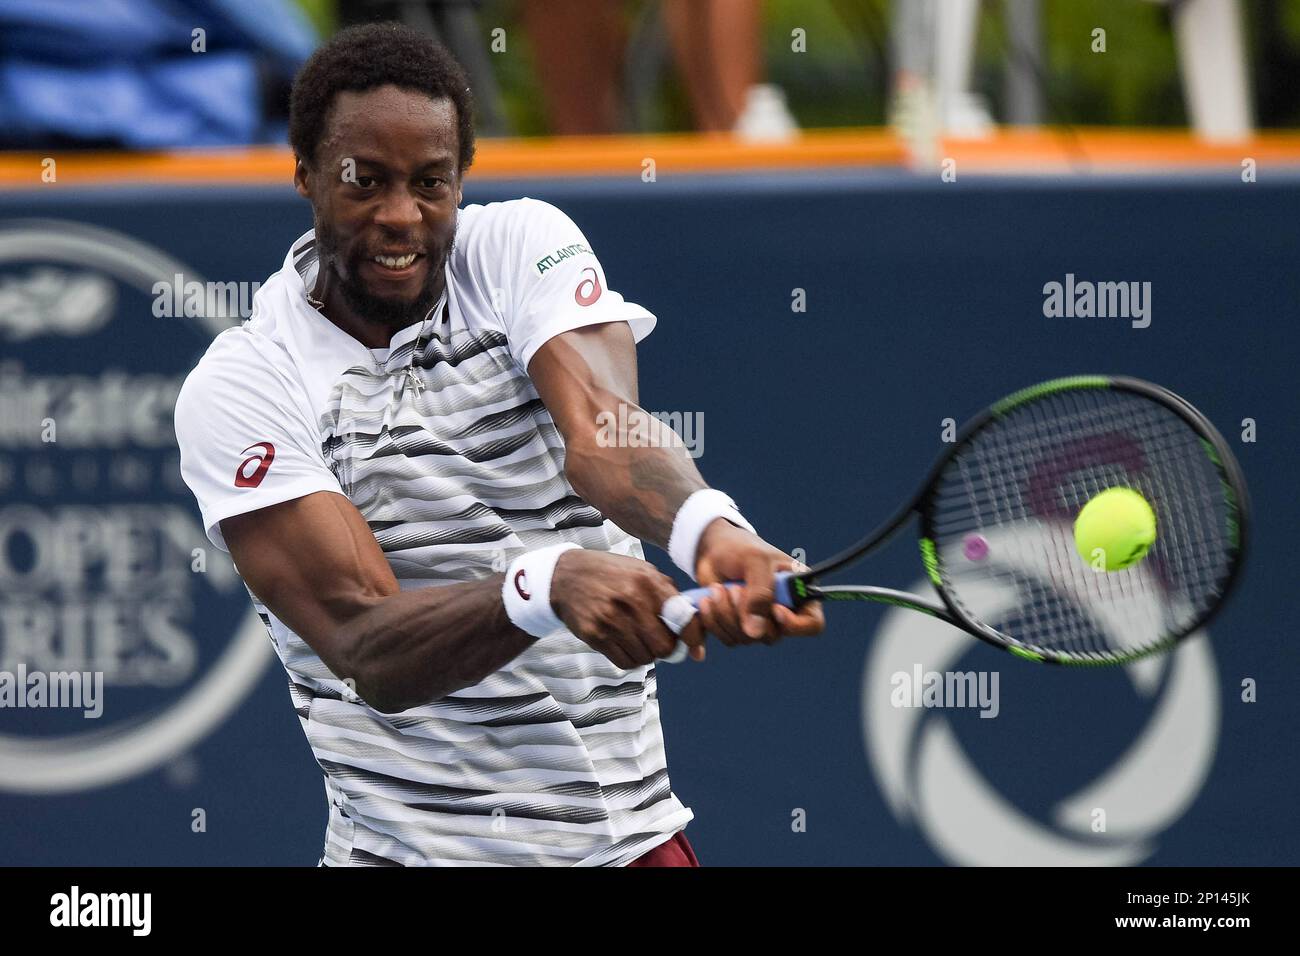 July 28, 2016: Gael Monfils of France returns the ball to David Goffin of  Belgium during their third round match of the Rogers Cup tournament at the  Aviva Centre in Toronto, Ontario,